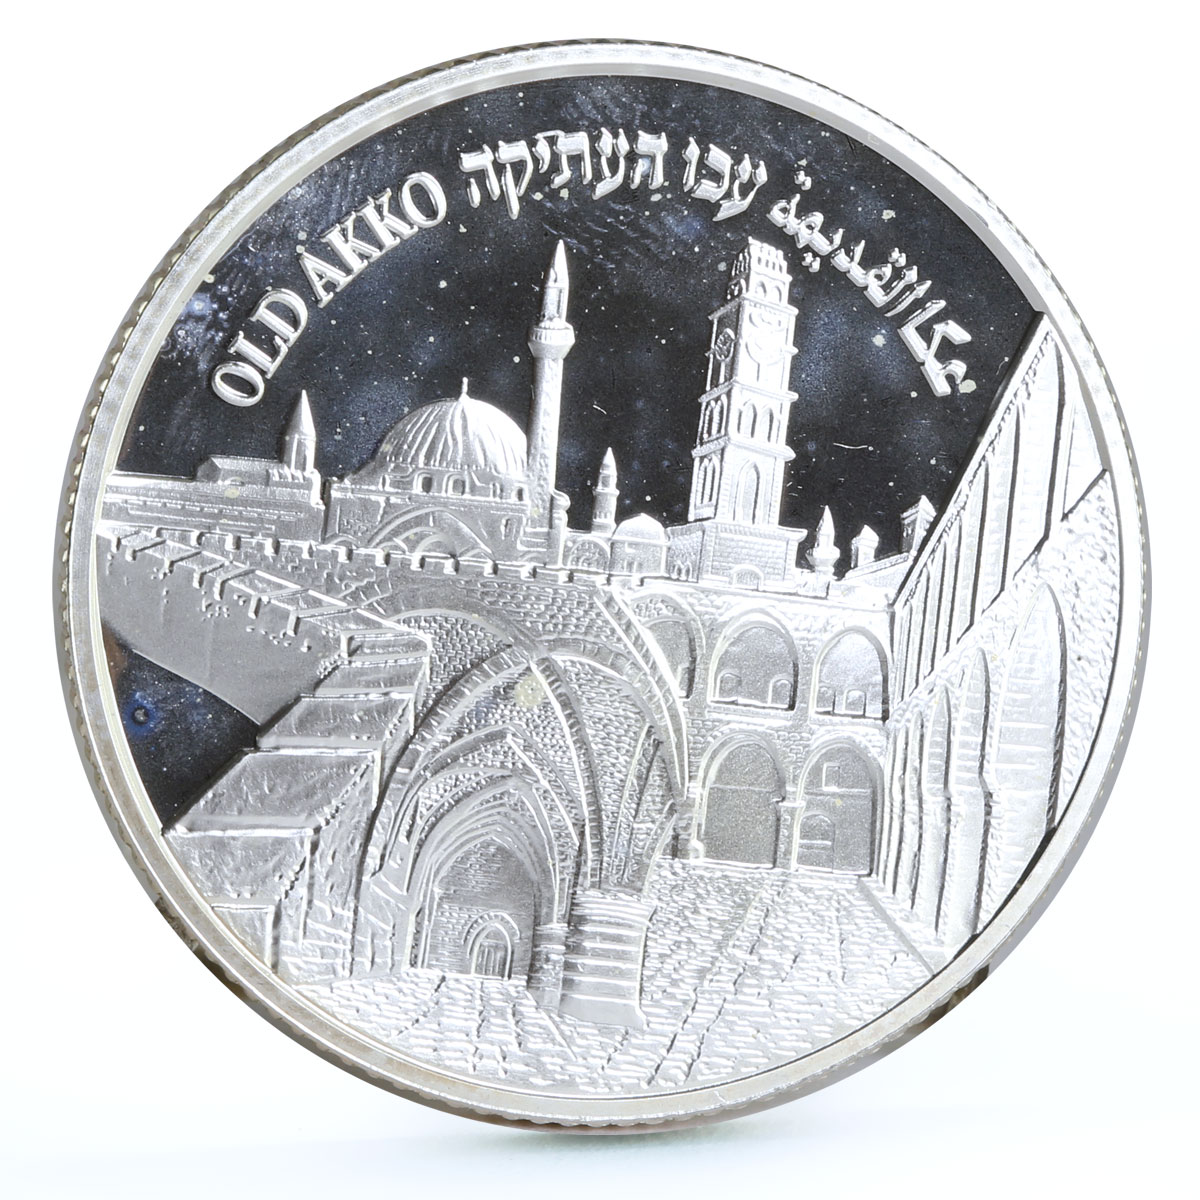 Israel 2 sheqalim Old City Akko Buildings Architecture proof silver coin 2010